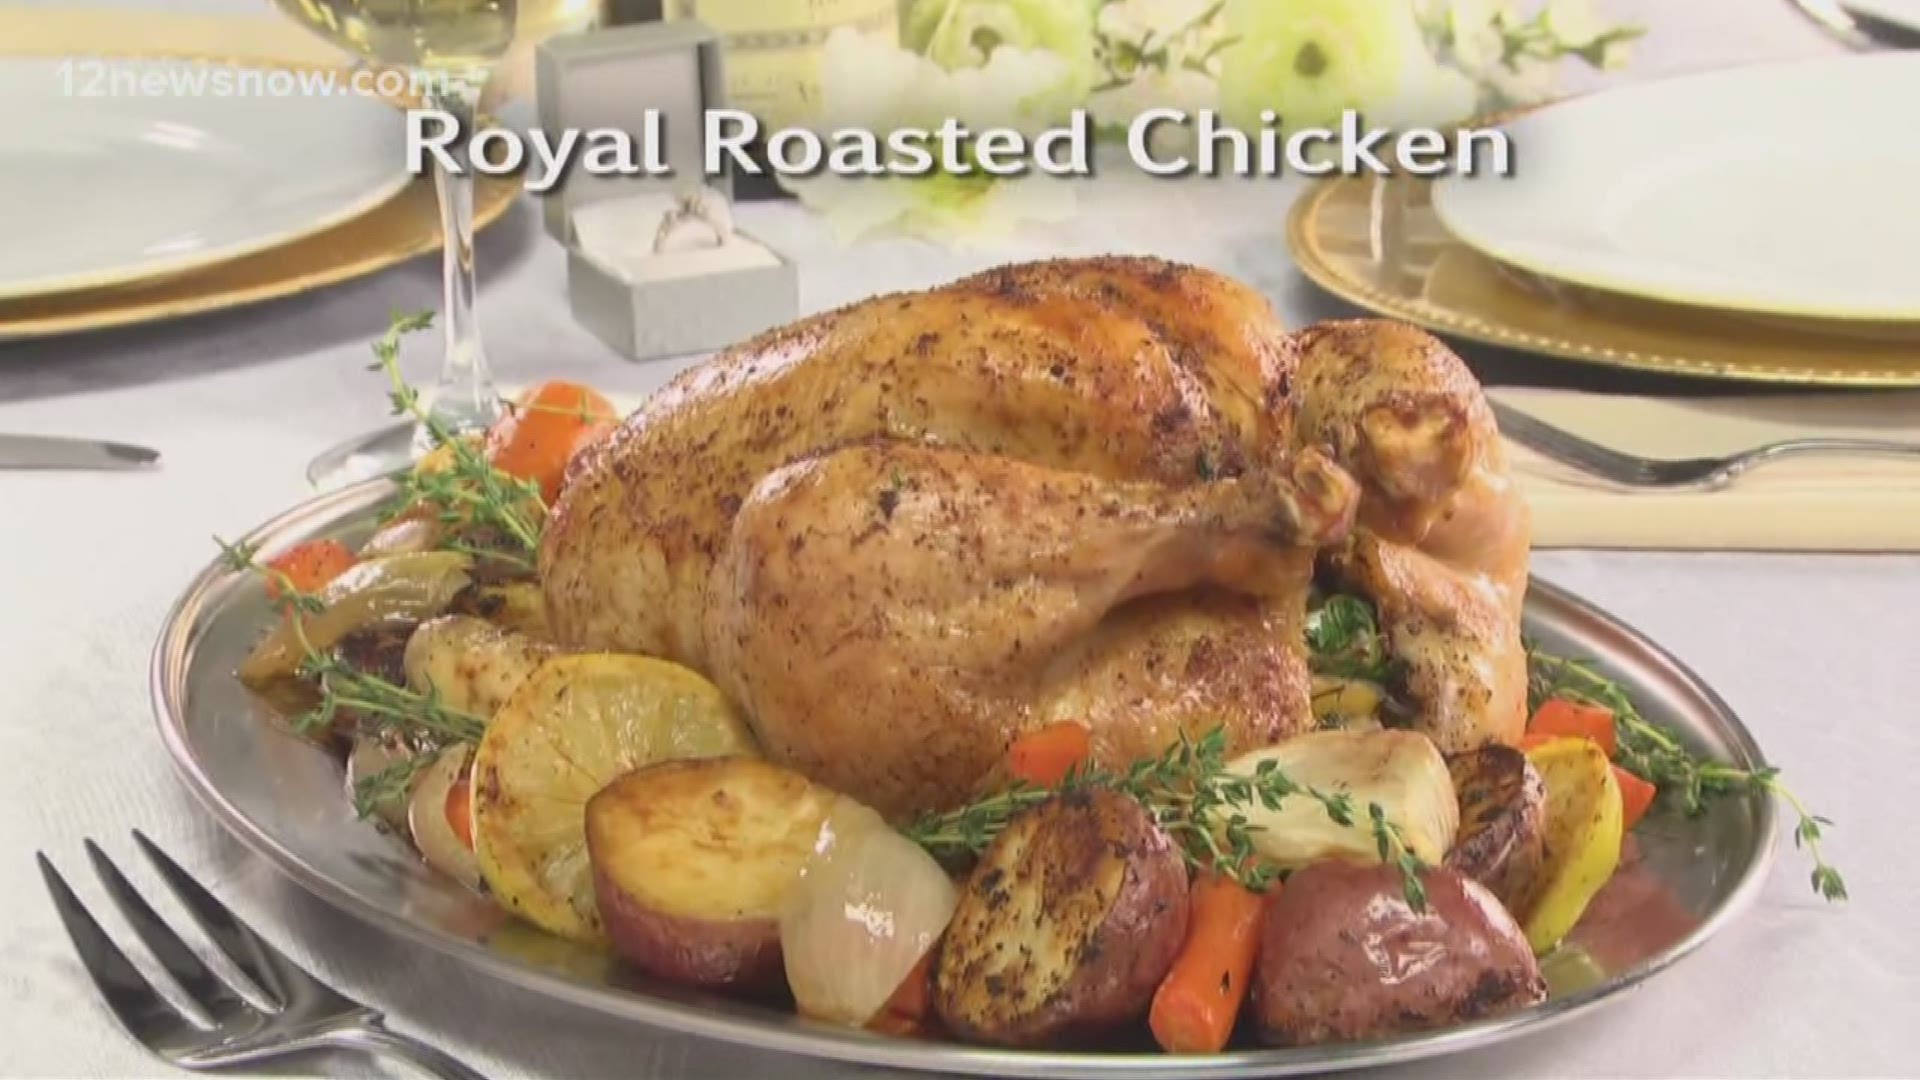 Mr. Food makes Royal Roasted Chicken